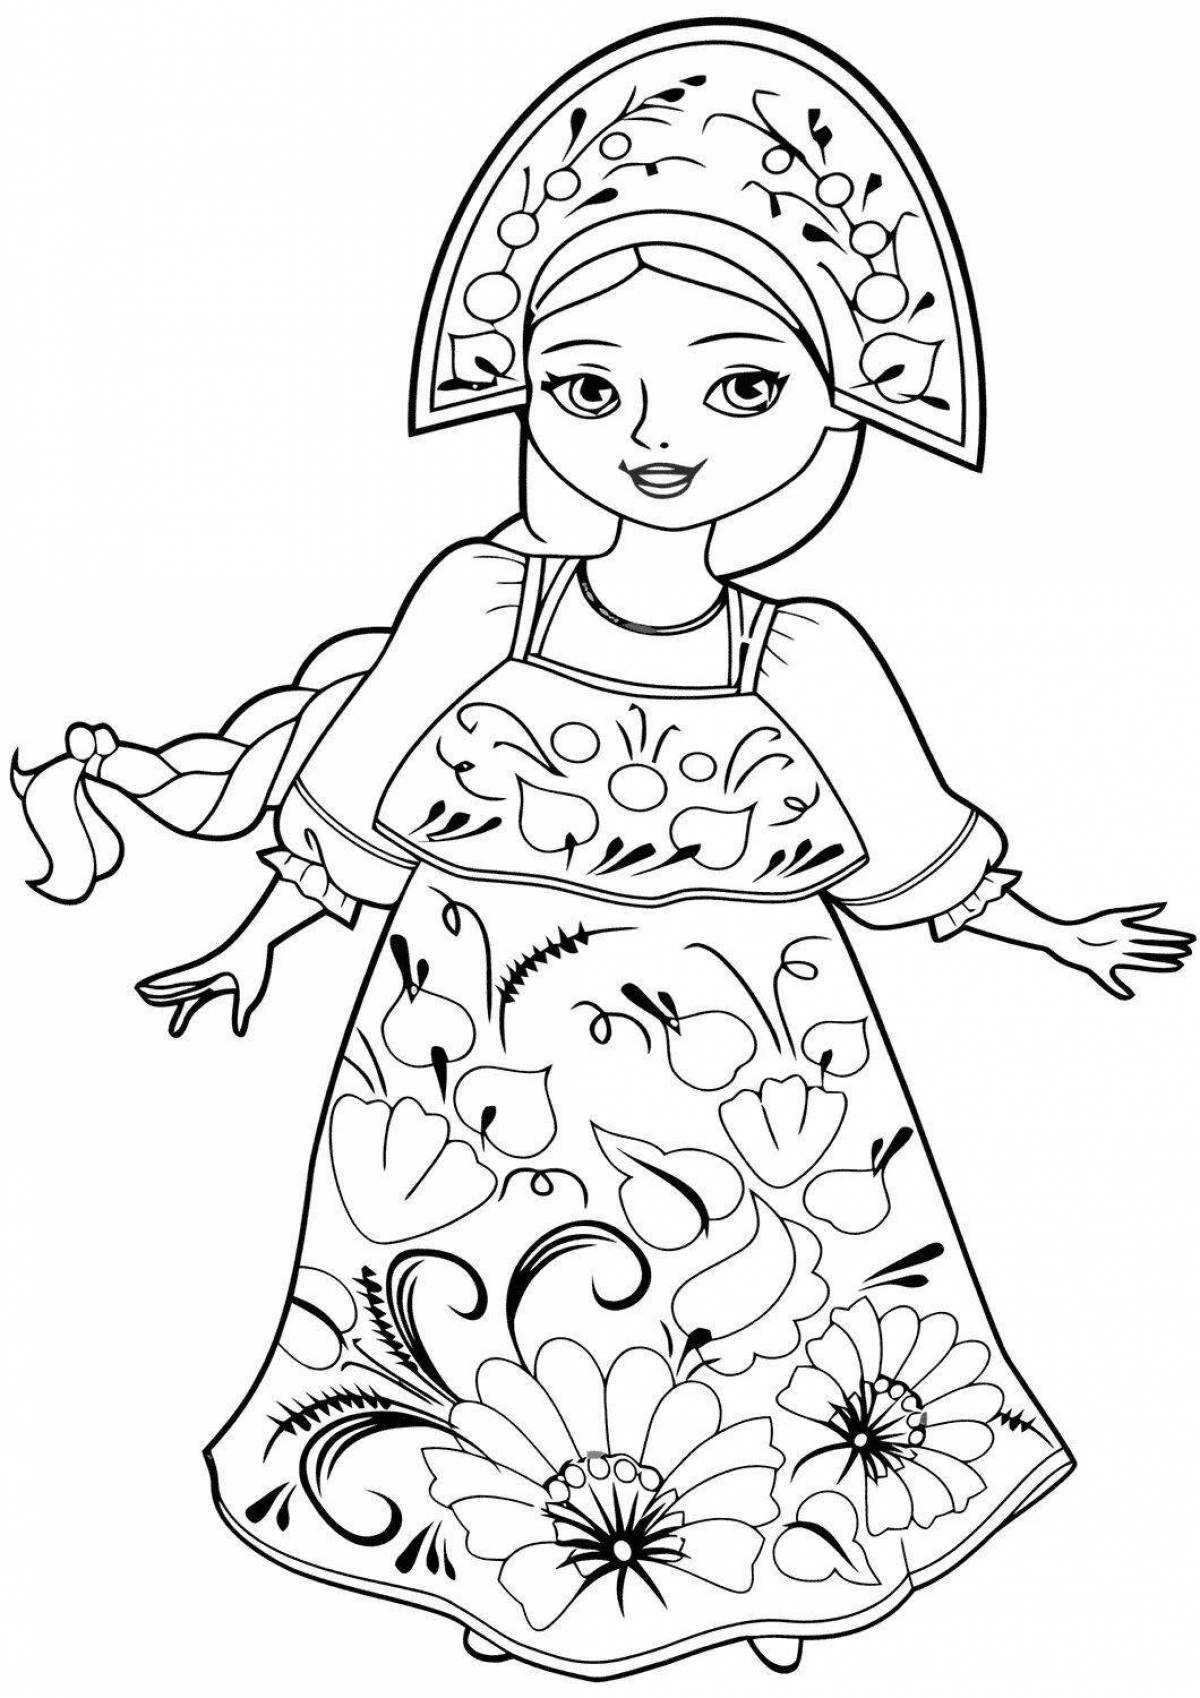 Violent princess coloring pages for girls